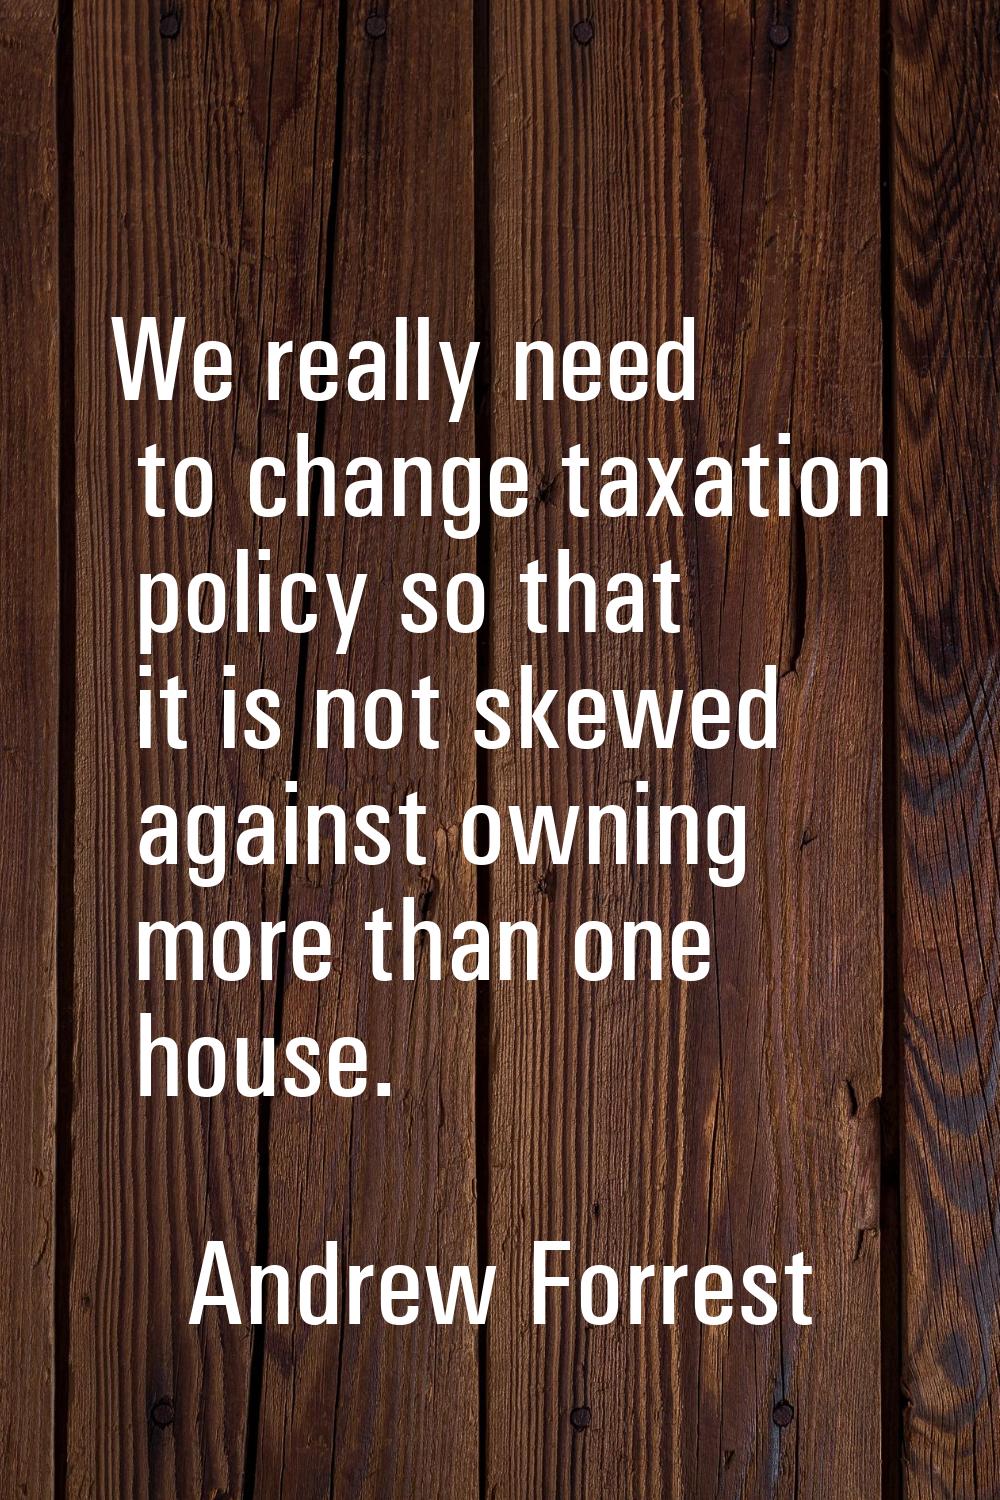 We really need to change taxation policy so that it is not skewed against owning more than one hous